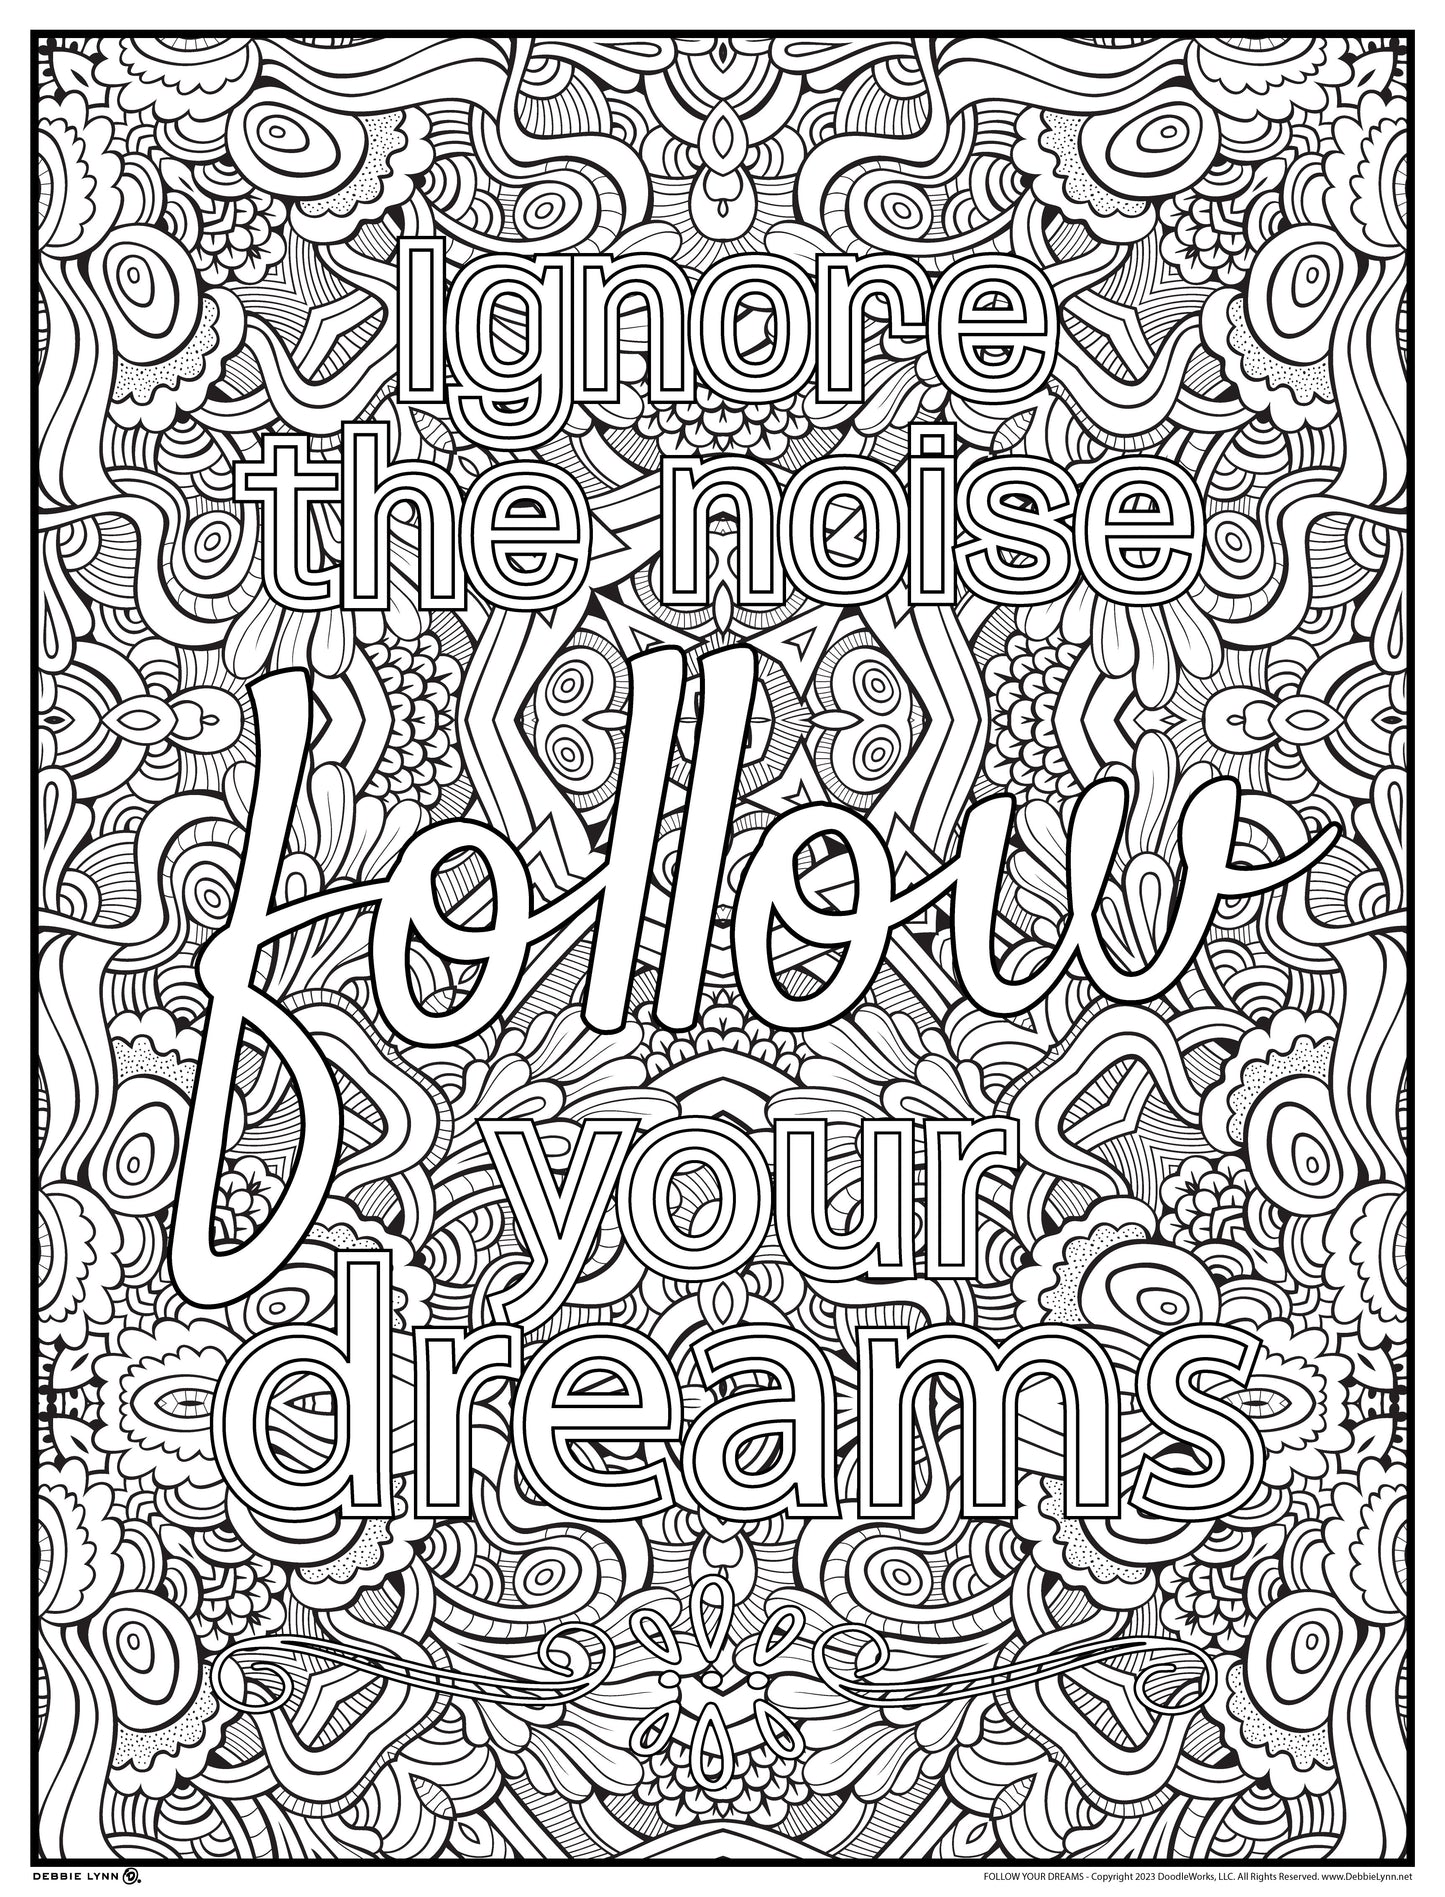 Follow Your Dreams Personalized Giant Coloring Poster 46"x60"